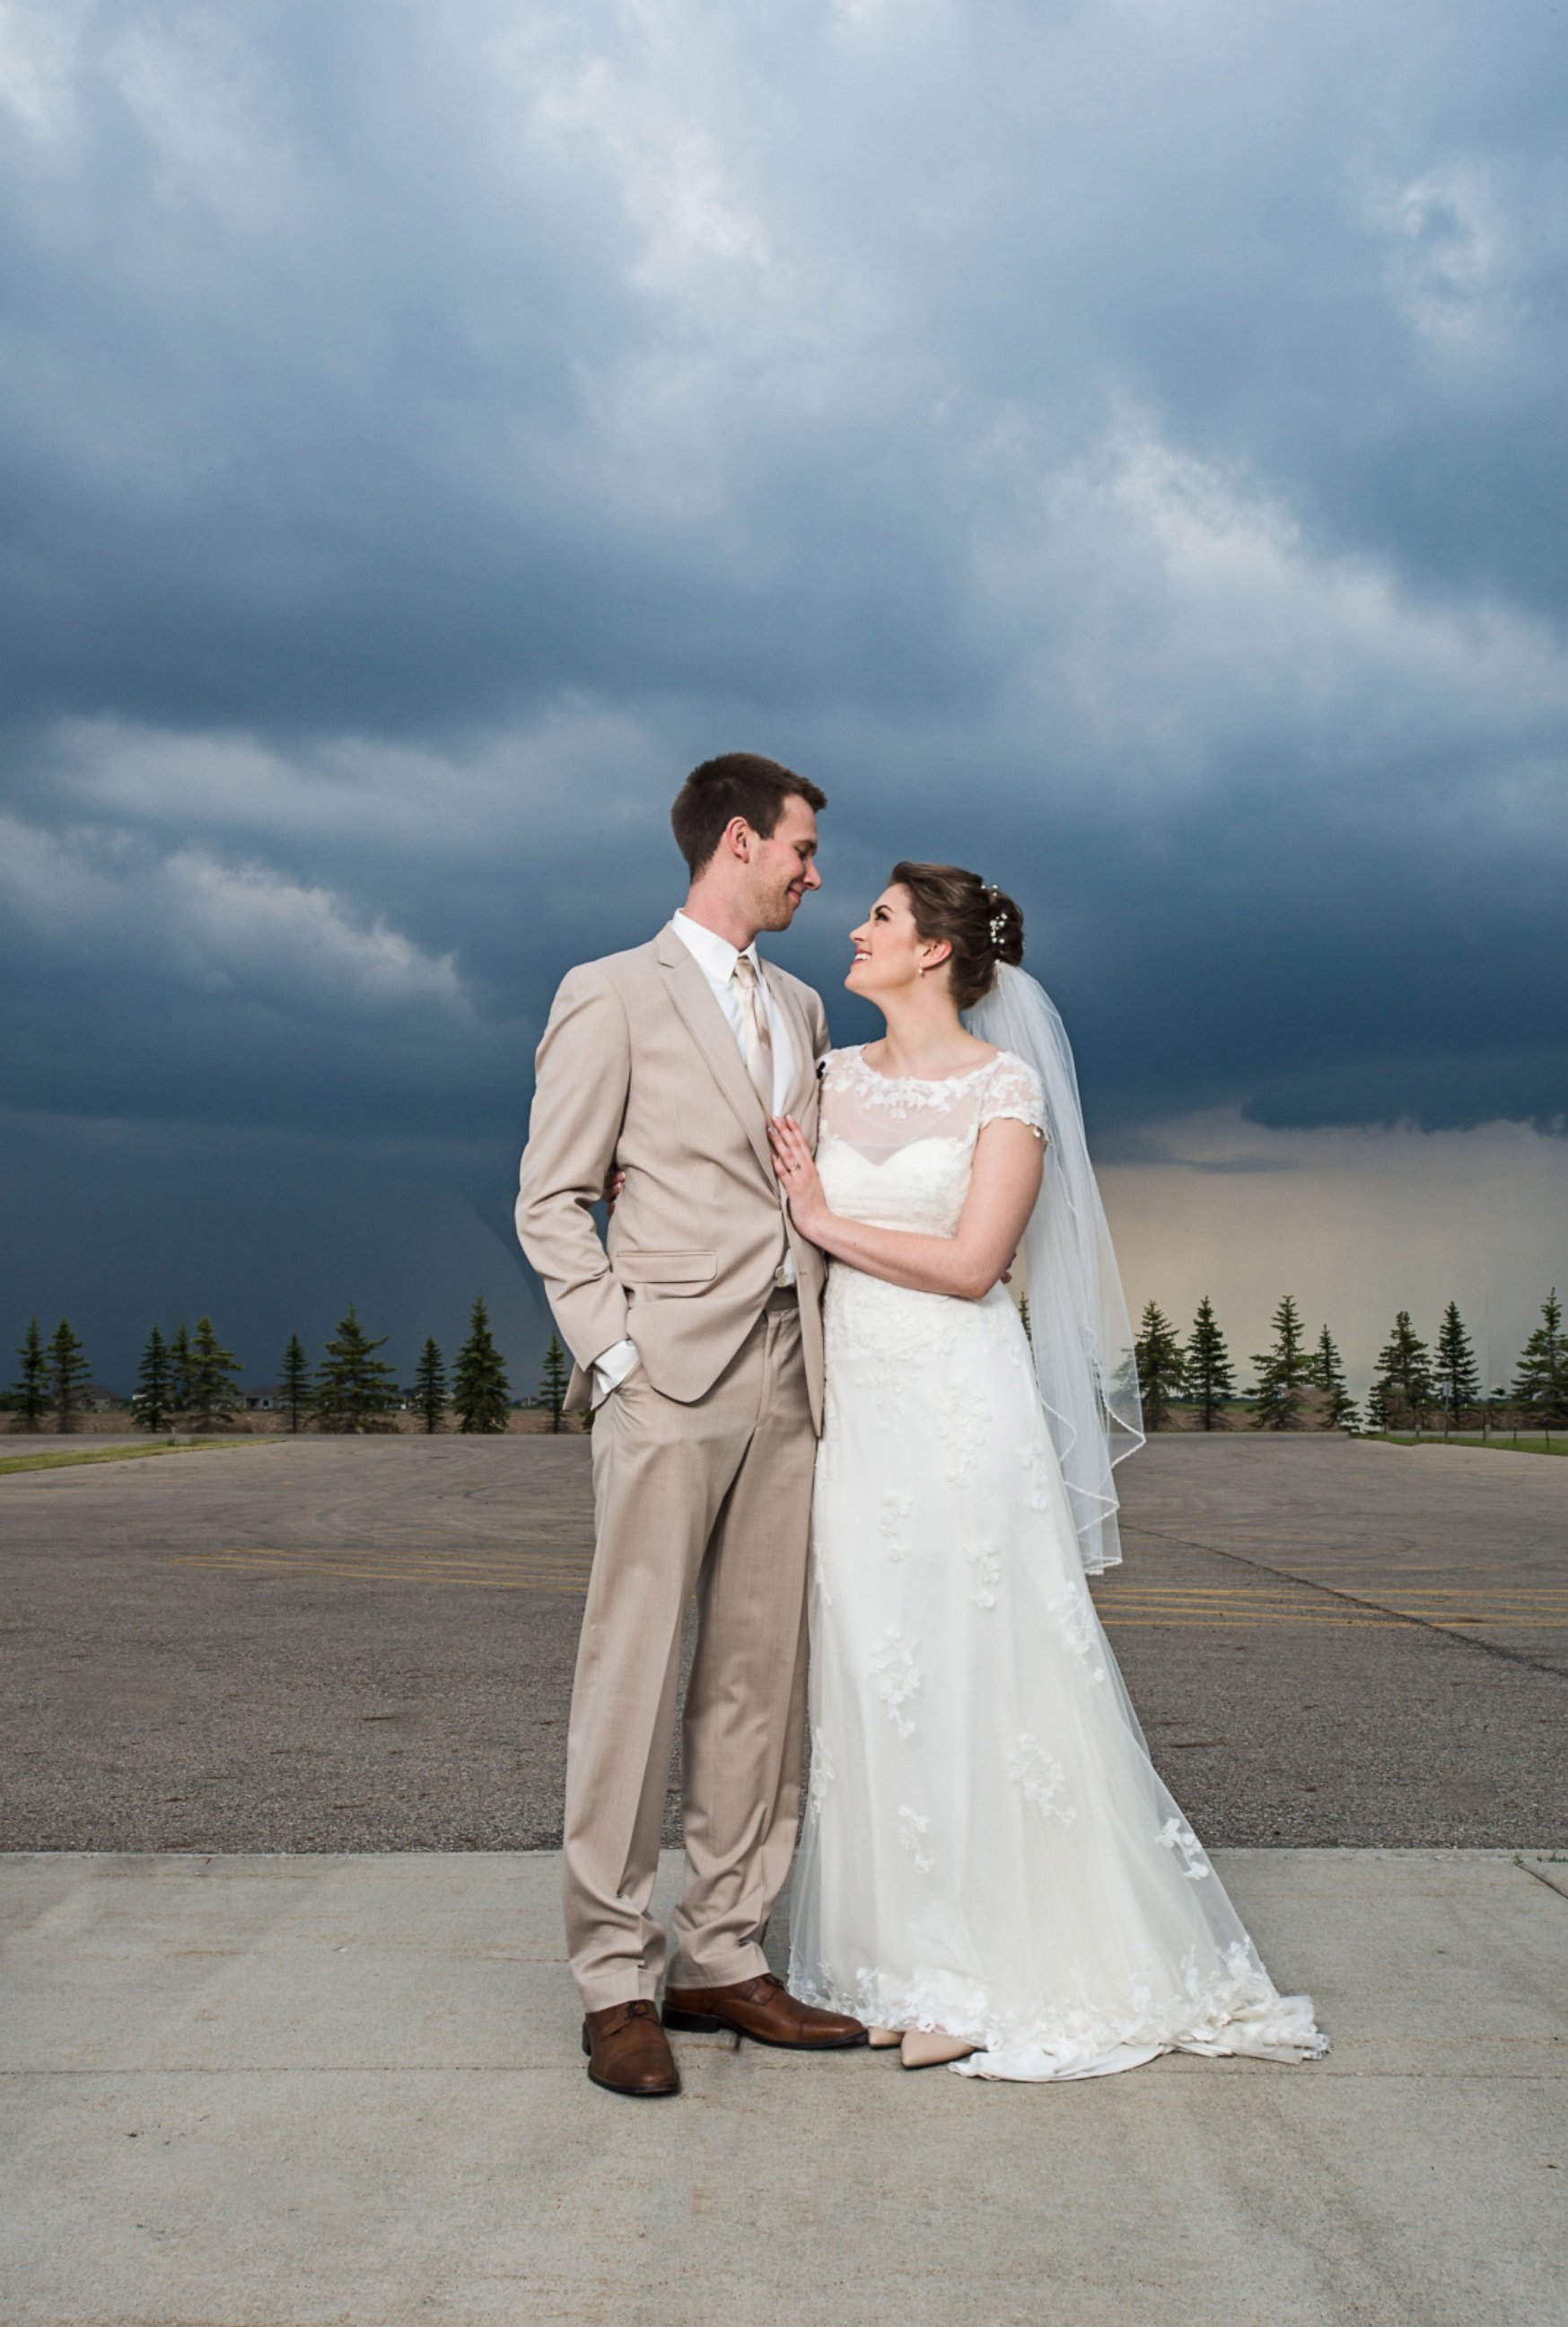 PHOTO: Kipp and Kelsey Loeslie's wedding photo includes a funnel cloud in the distance.